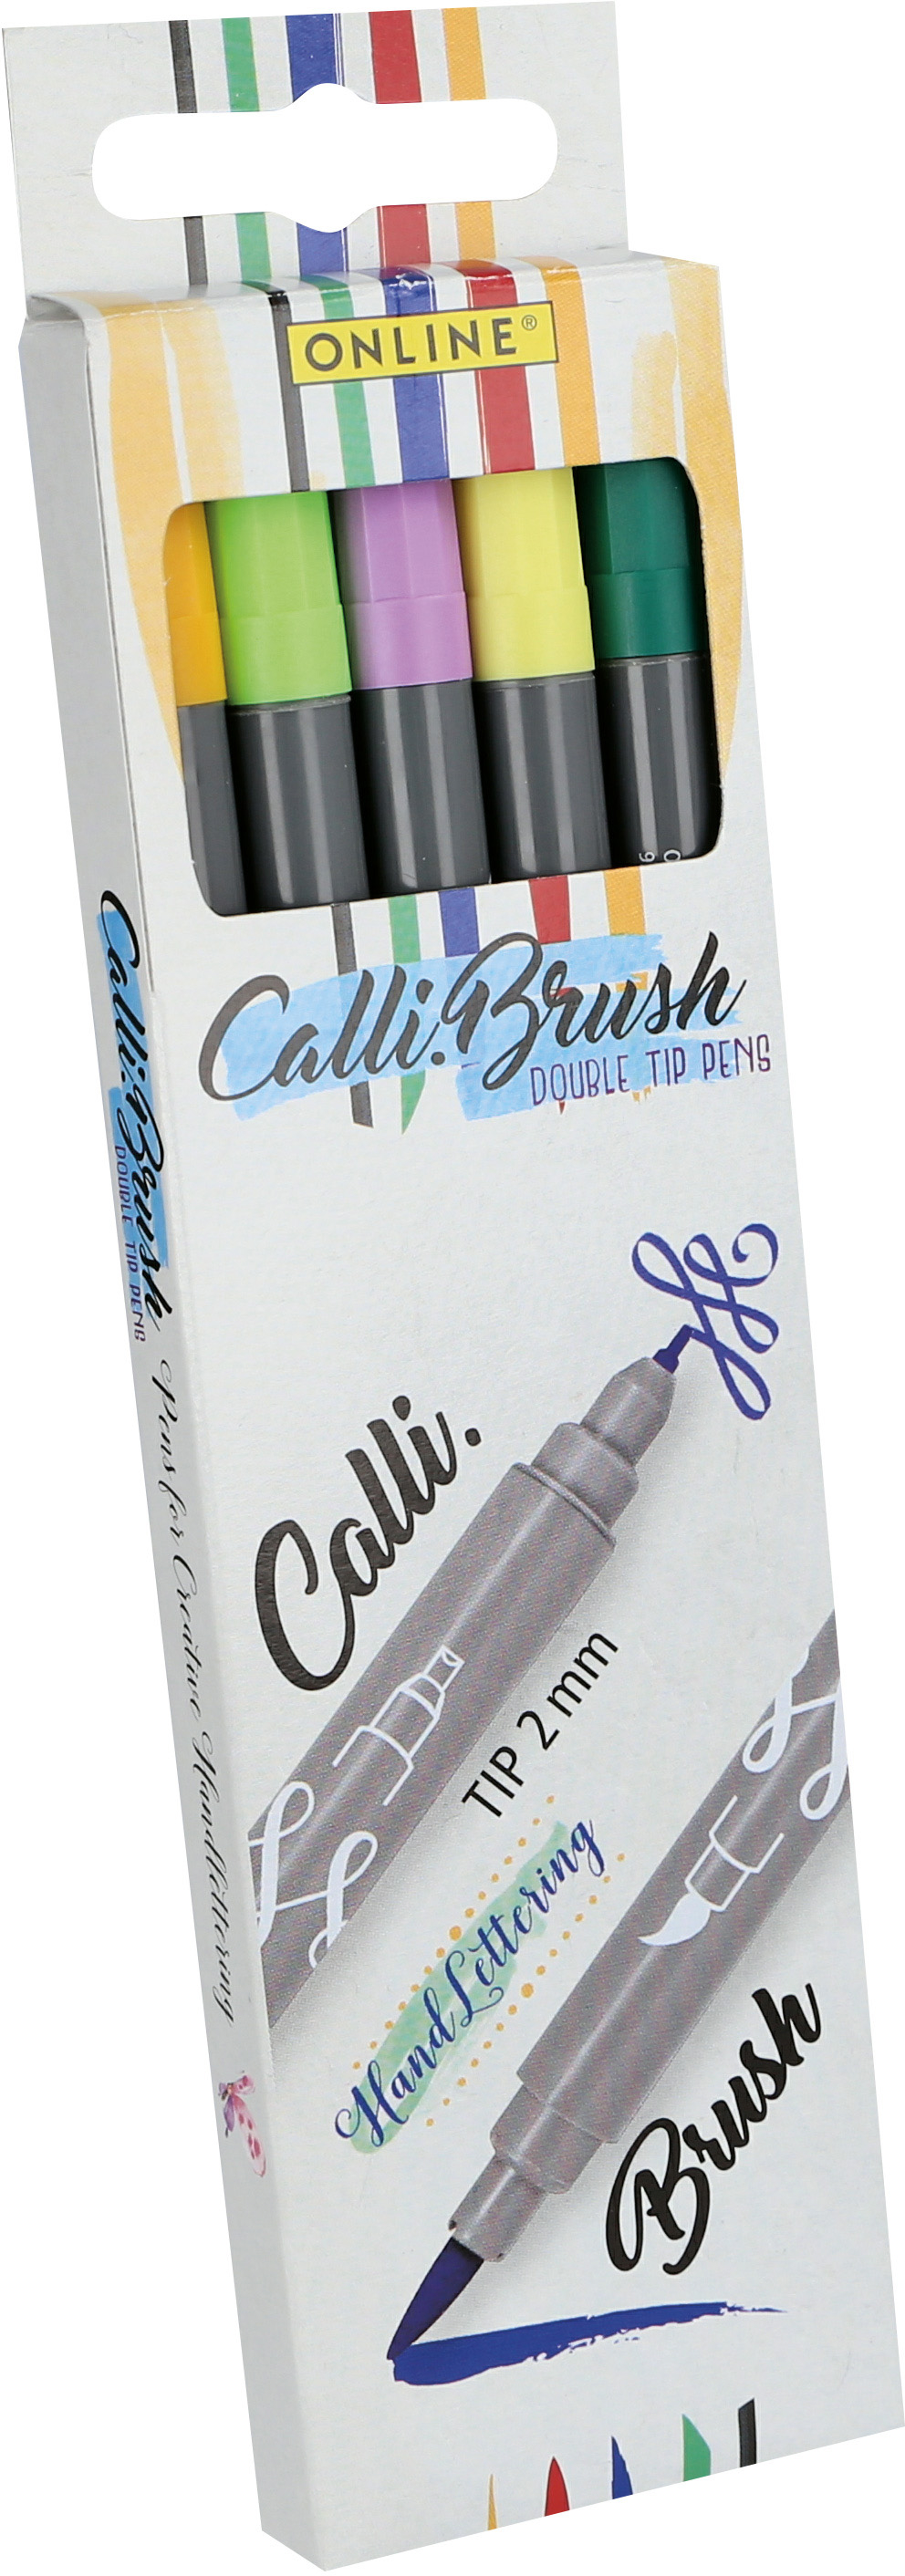 ONLINE Calli Brush Spring Edition 19134 5 couleurs Double Tip, 2mm